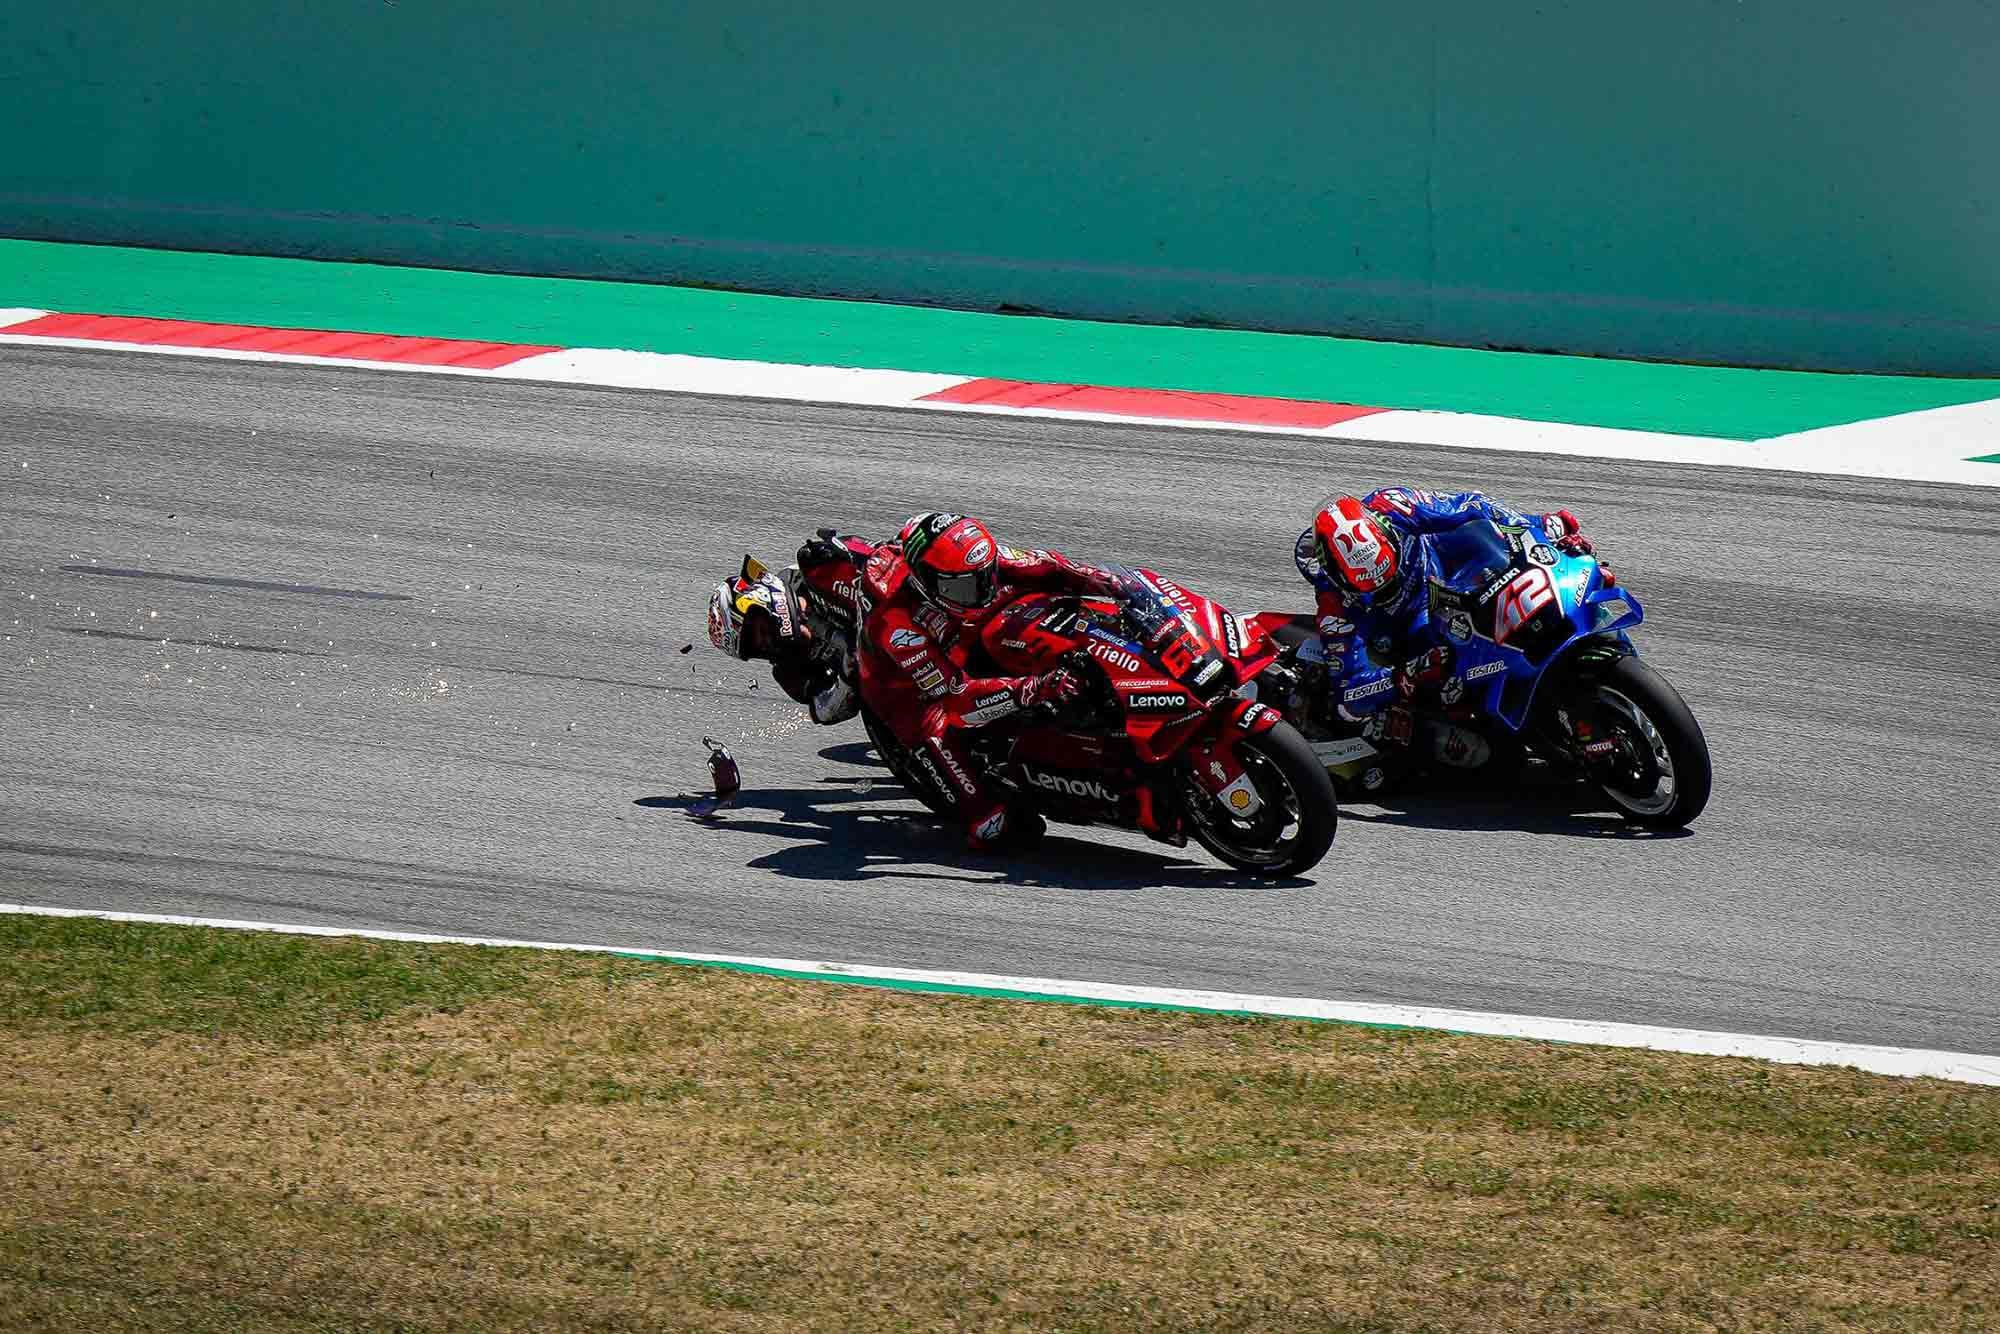 Francesco Bagnaia sees his first lap exit of the race with the help of Nakagami as more than just a racing incident.